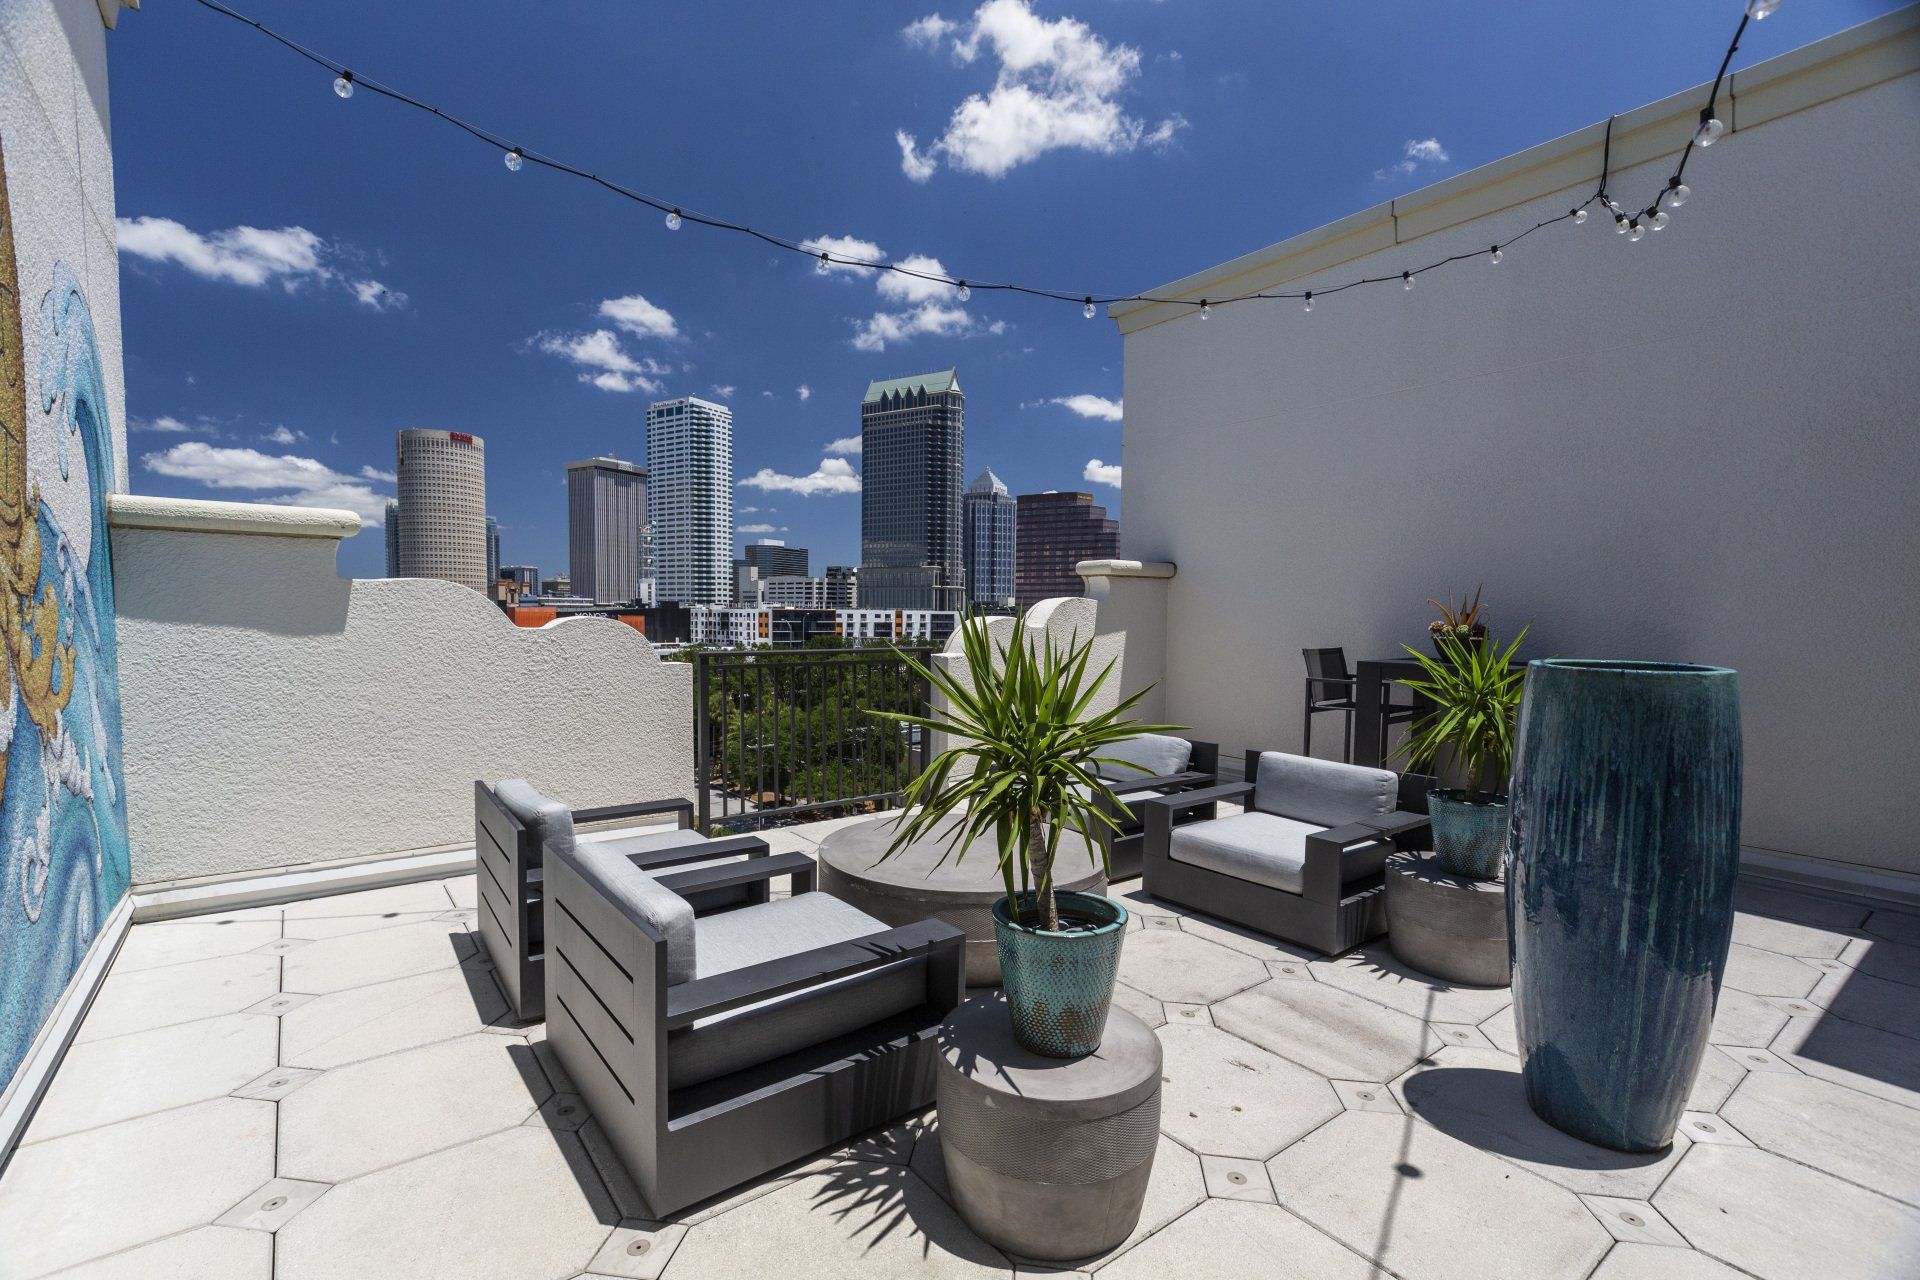 2Bayshore | Rooftop Terrace with Tampa skyline views